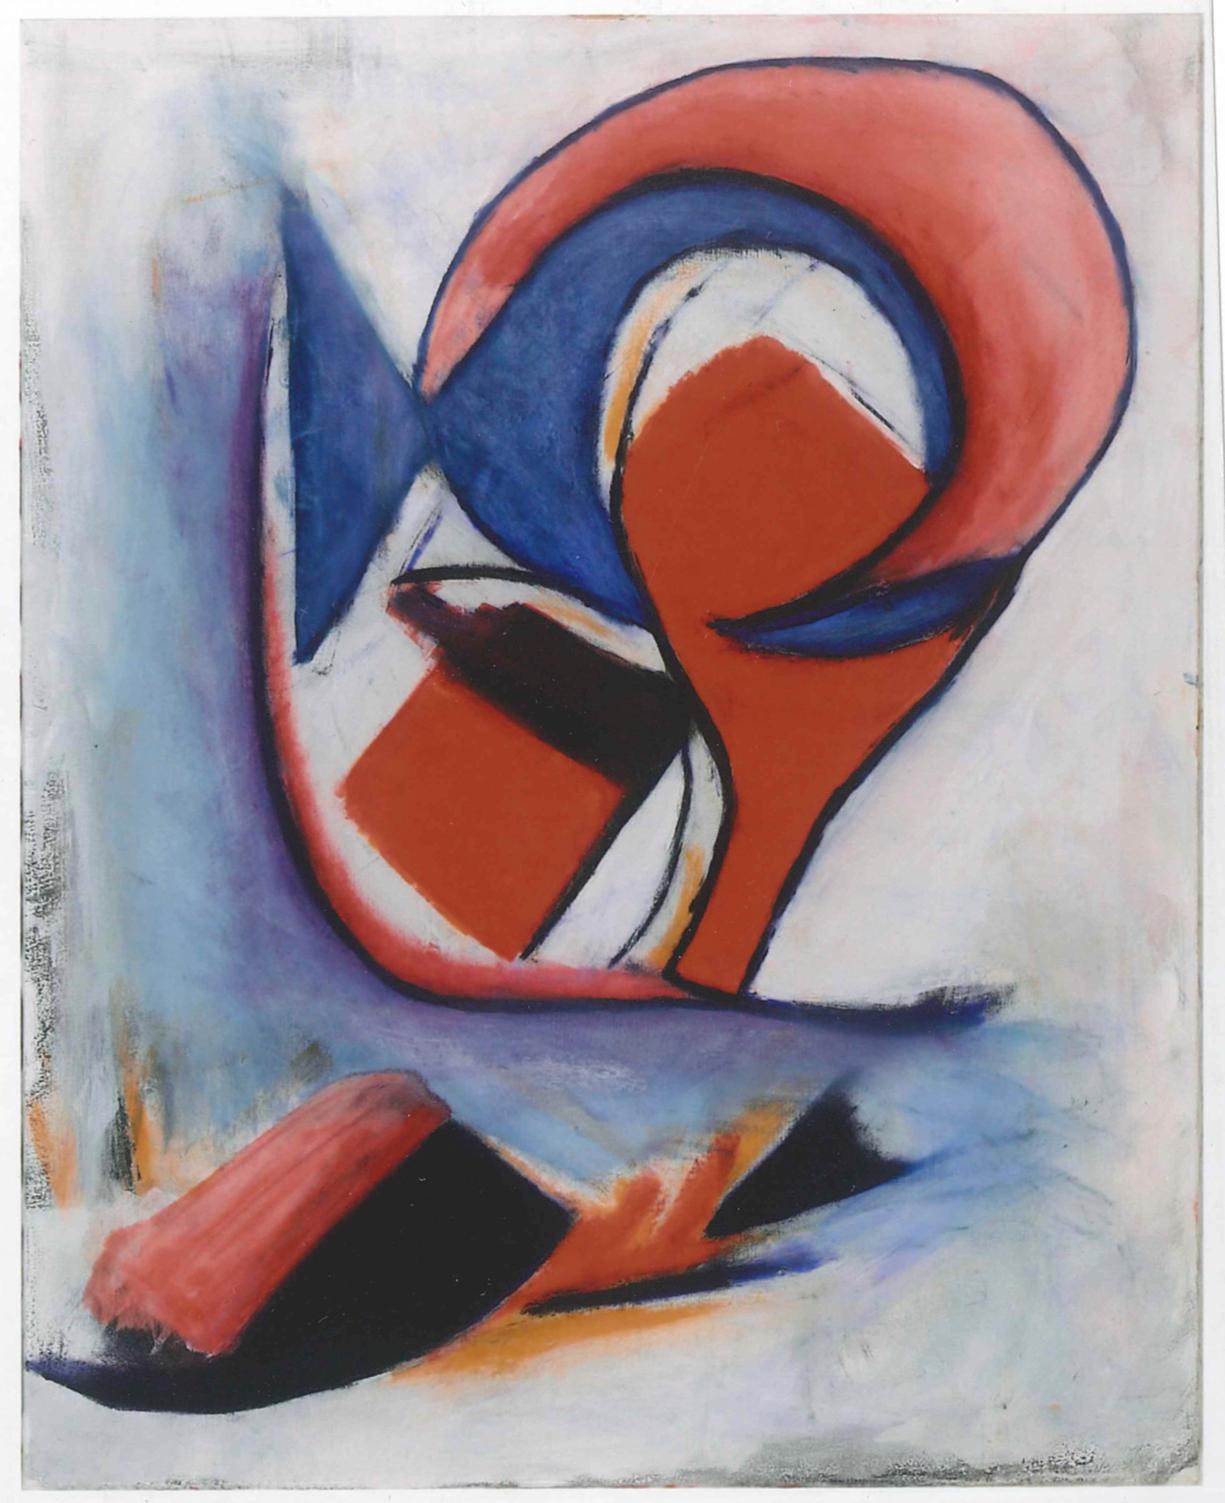 Abstract Expression is an original artwork realized by Giorgio Lo Fermo in 2014.

Oil on canvas on hardboard.

This contemporary abstract composition is characterized by shapes that remind to waves. The tones of composition are red and blue on a